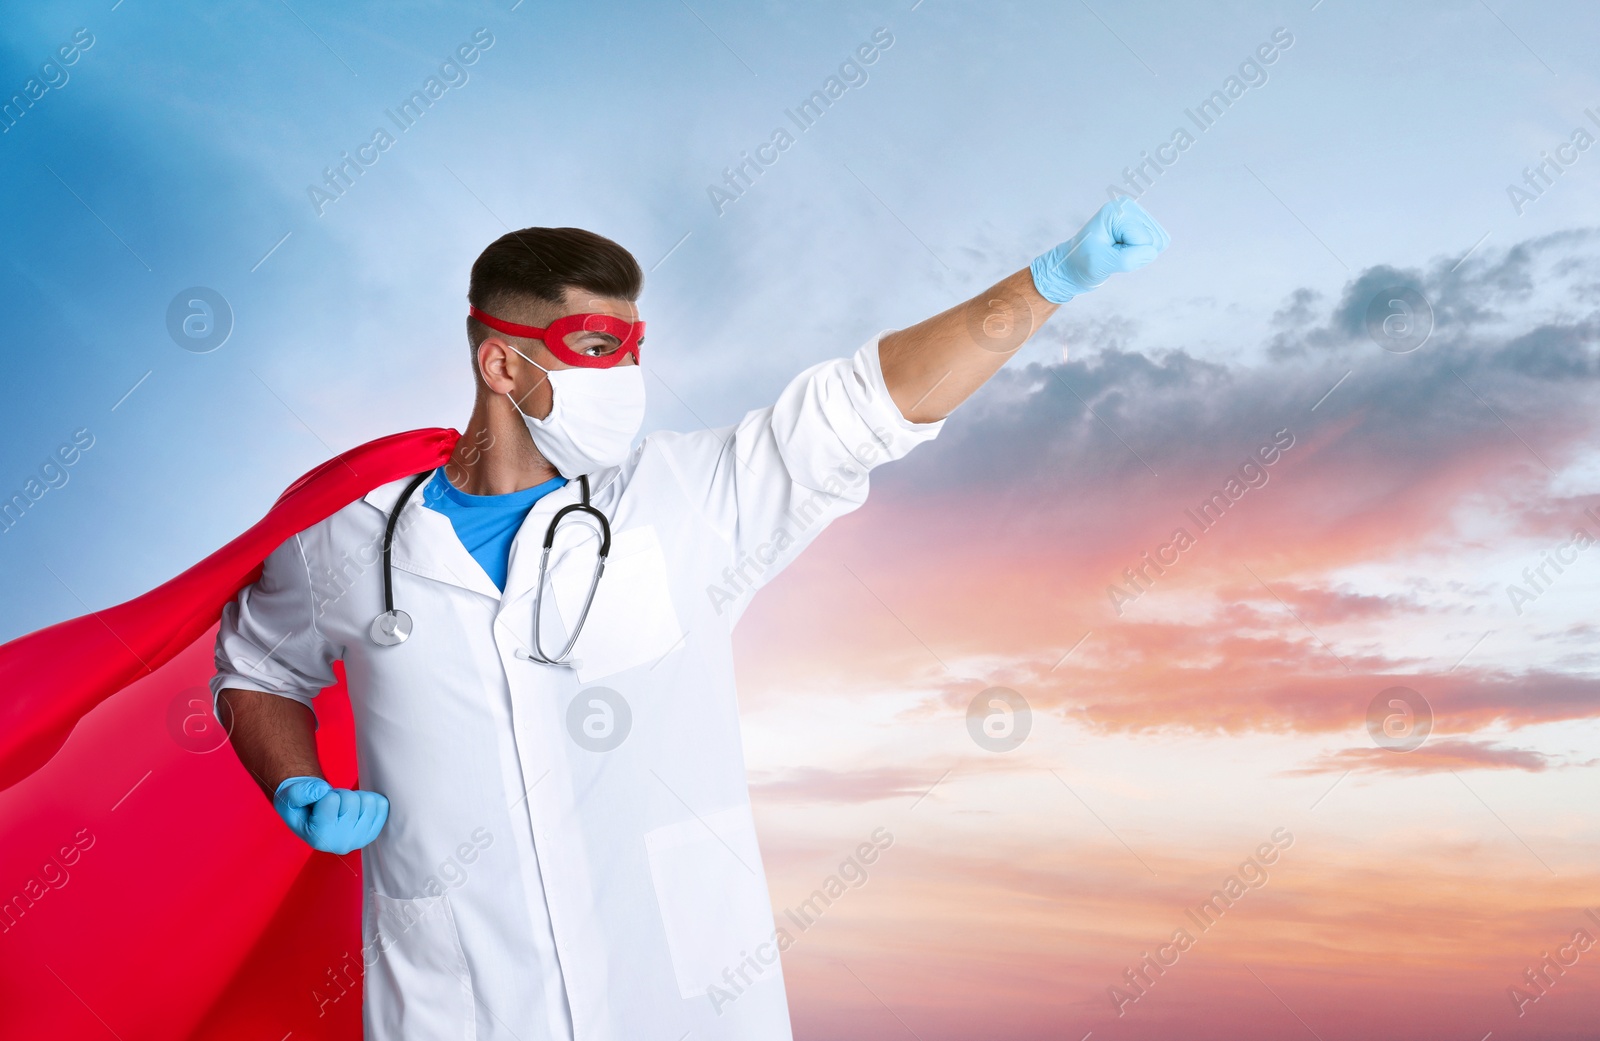 Image of Doctor wearing face mask and superhero costume against sky with clouds, space for text